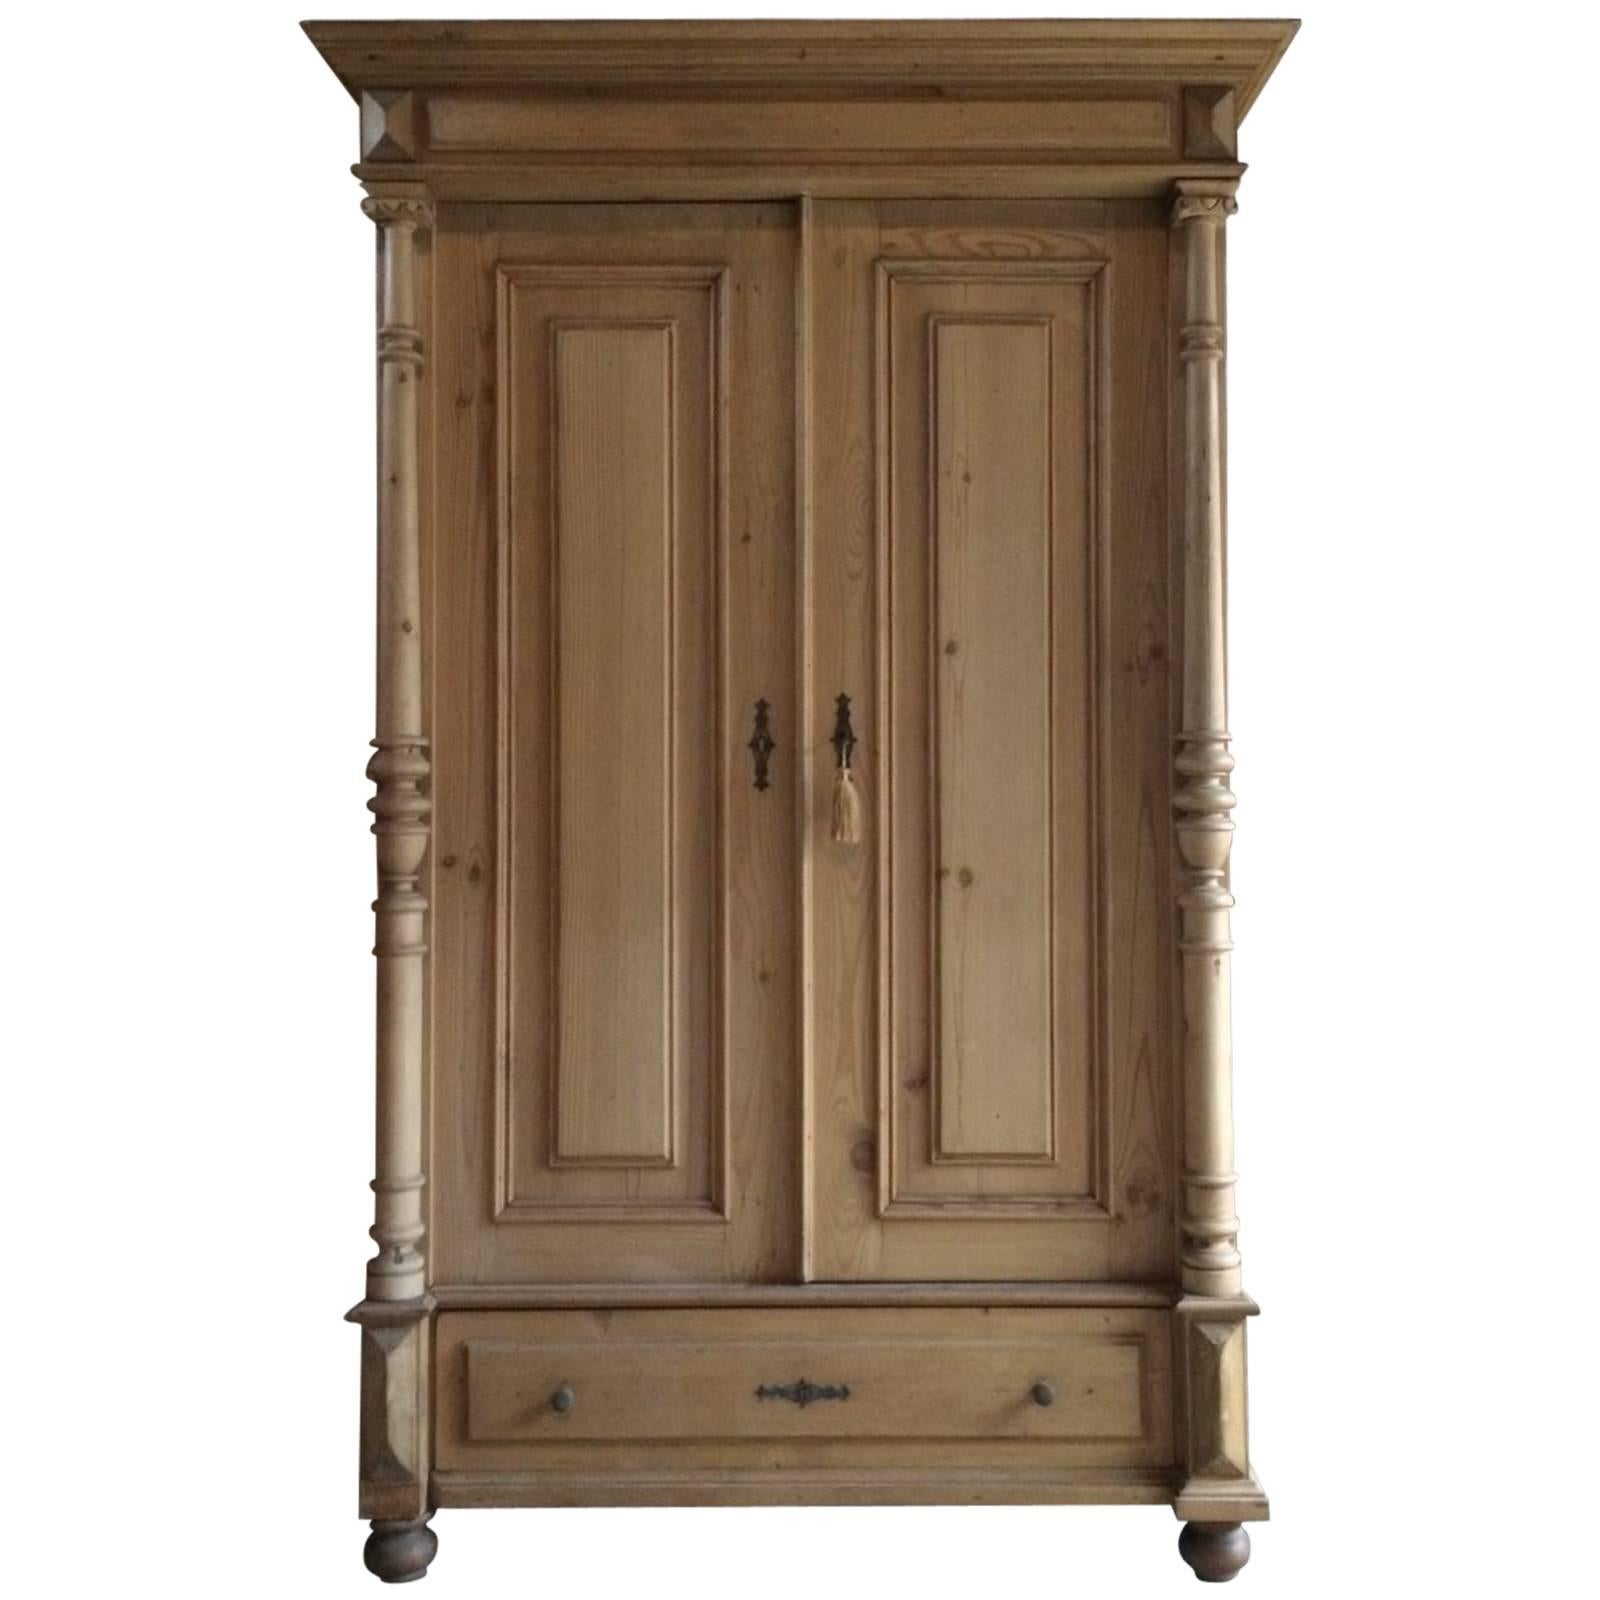 Antique French Double Wardrobe Armoire Solid Pine Victorian 19th Century